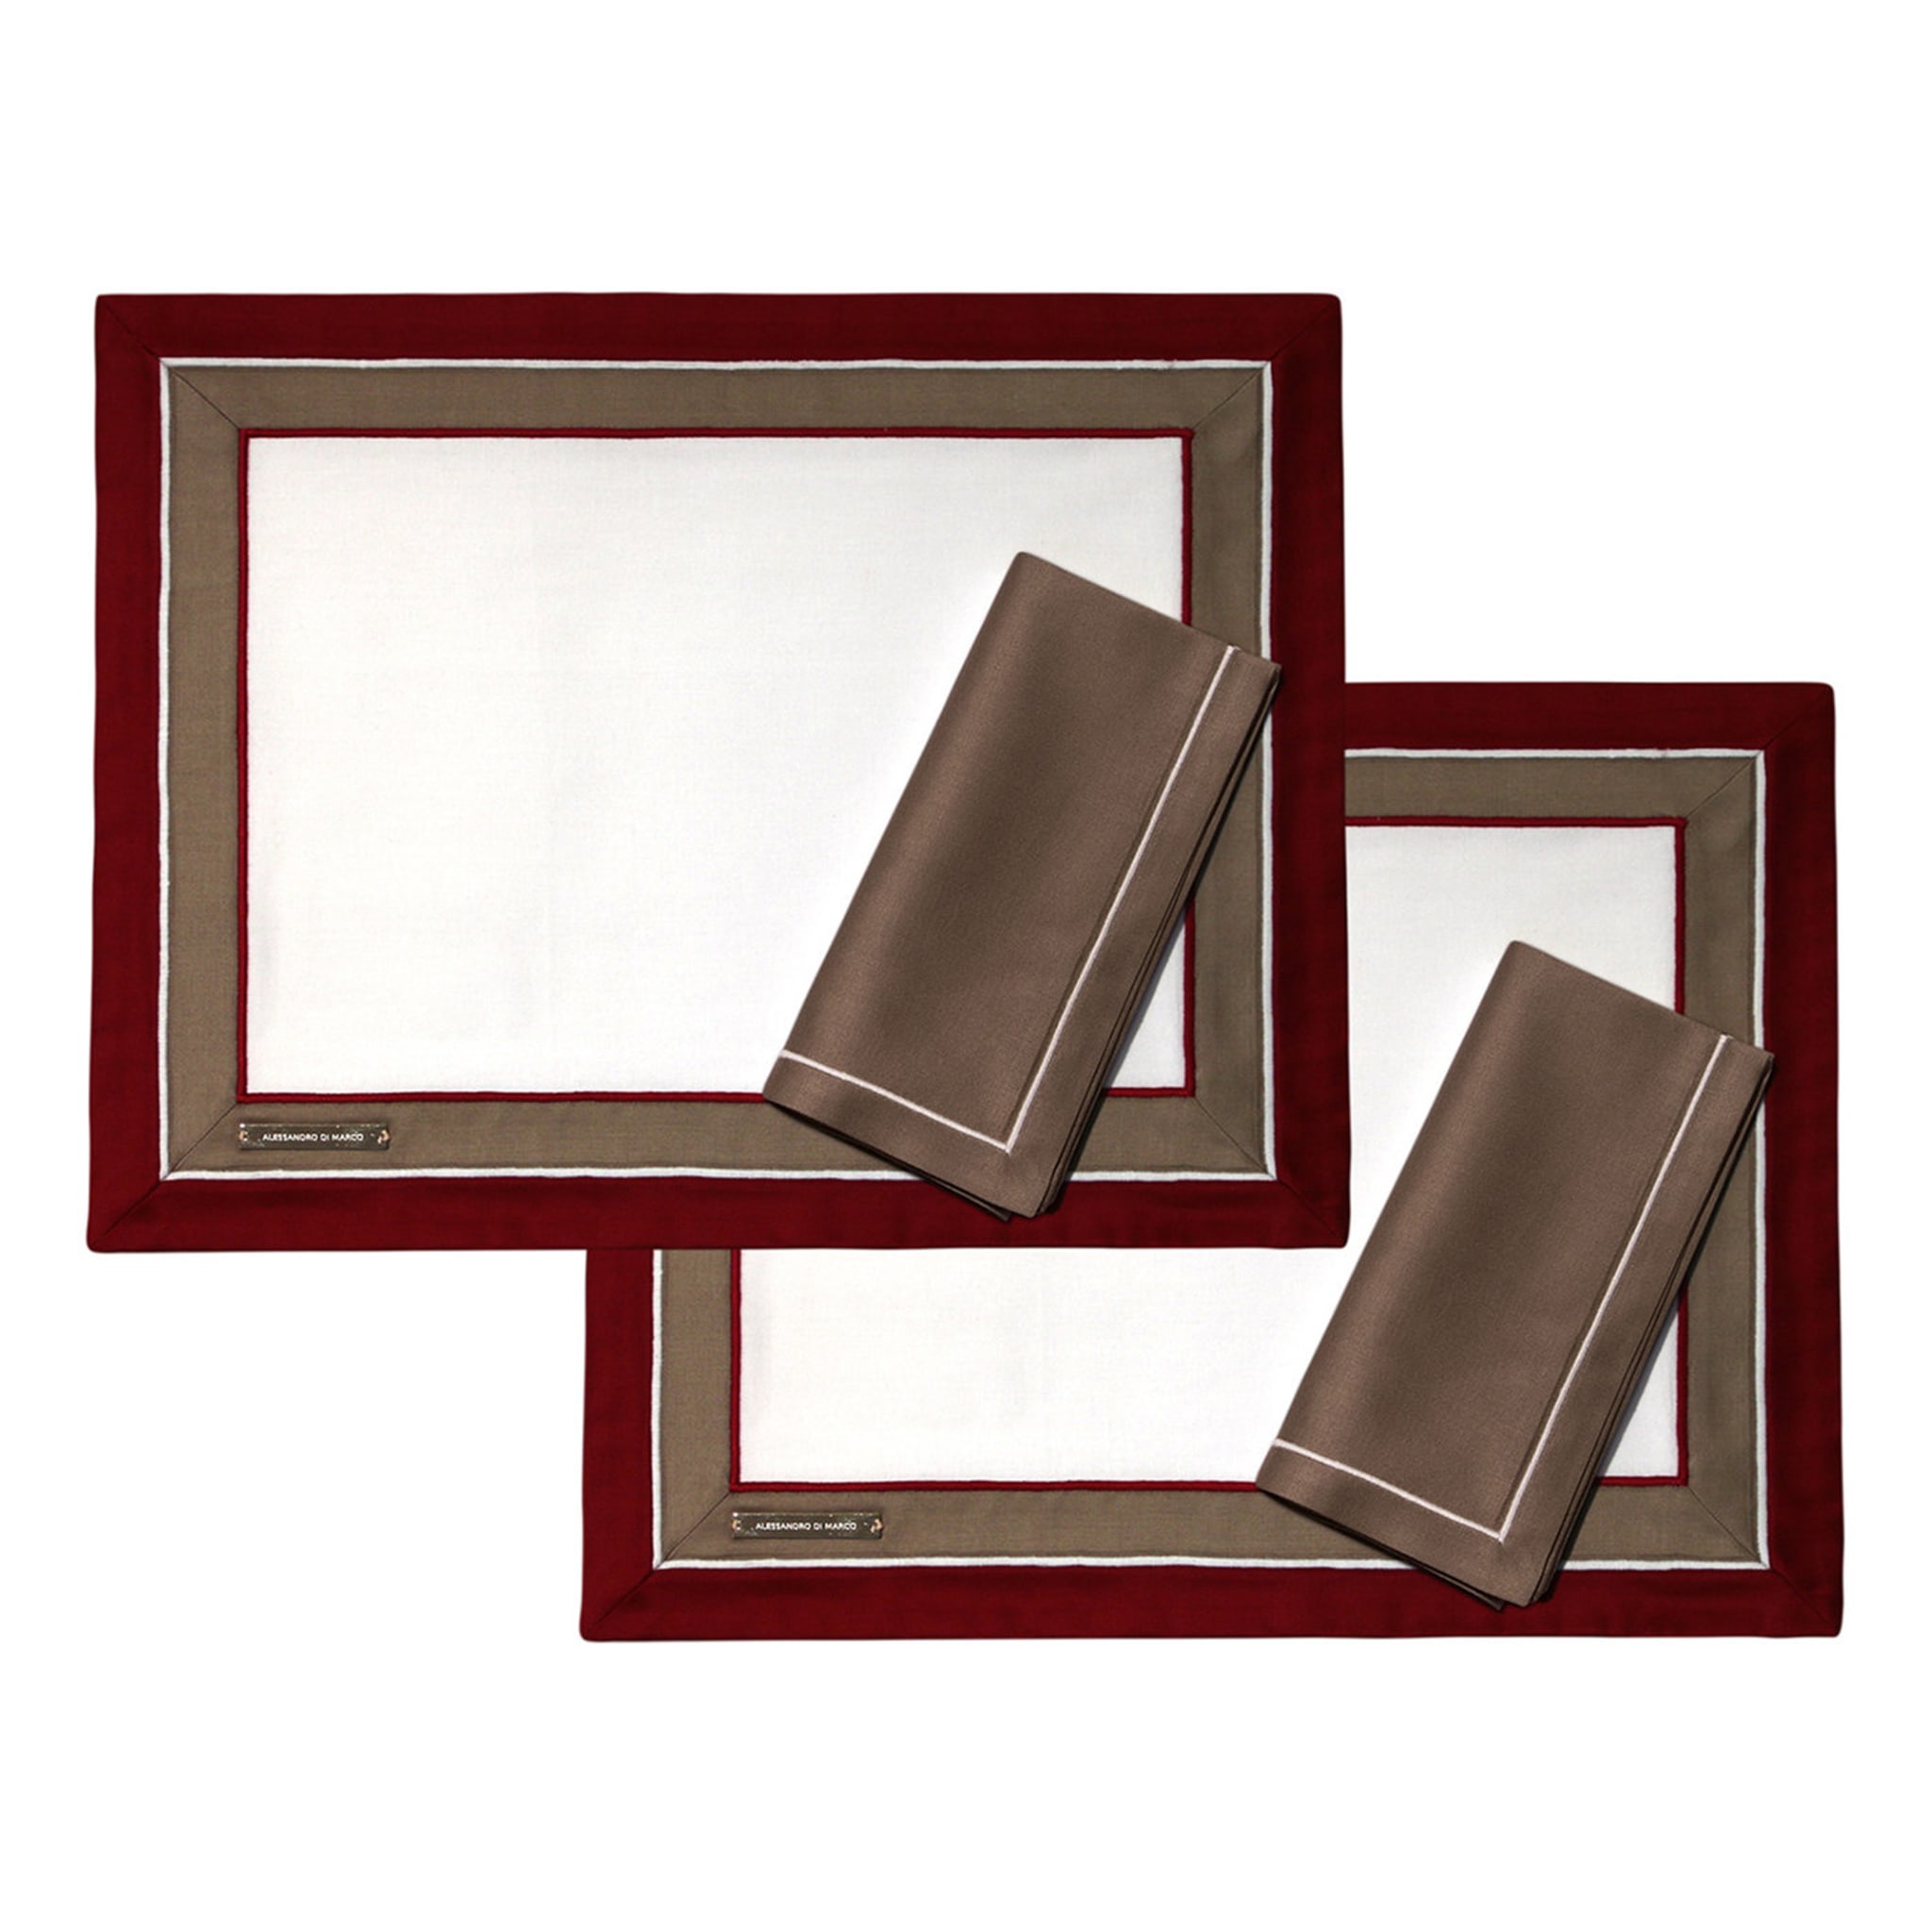 Placemats and Napkins - Red, Beige and White - Main view